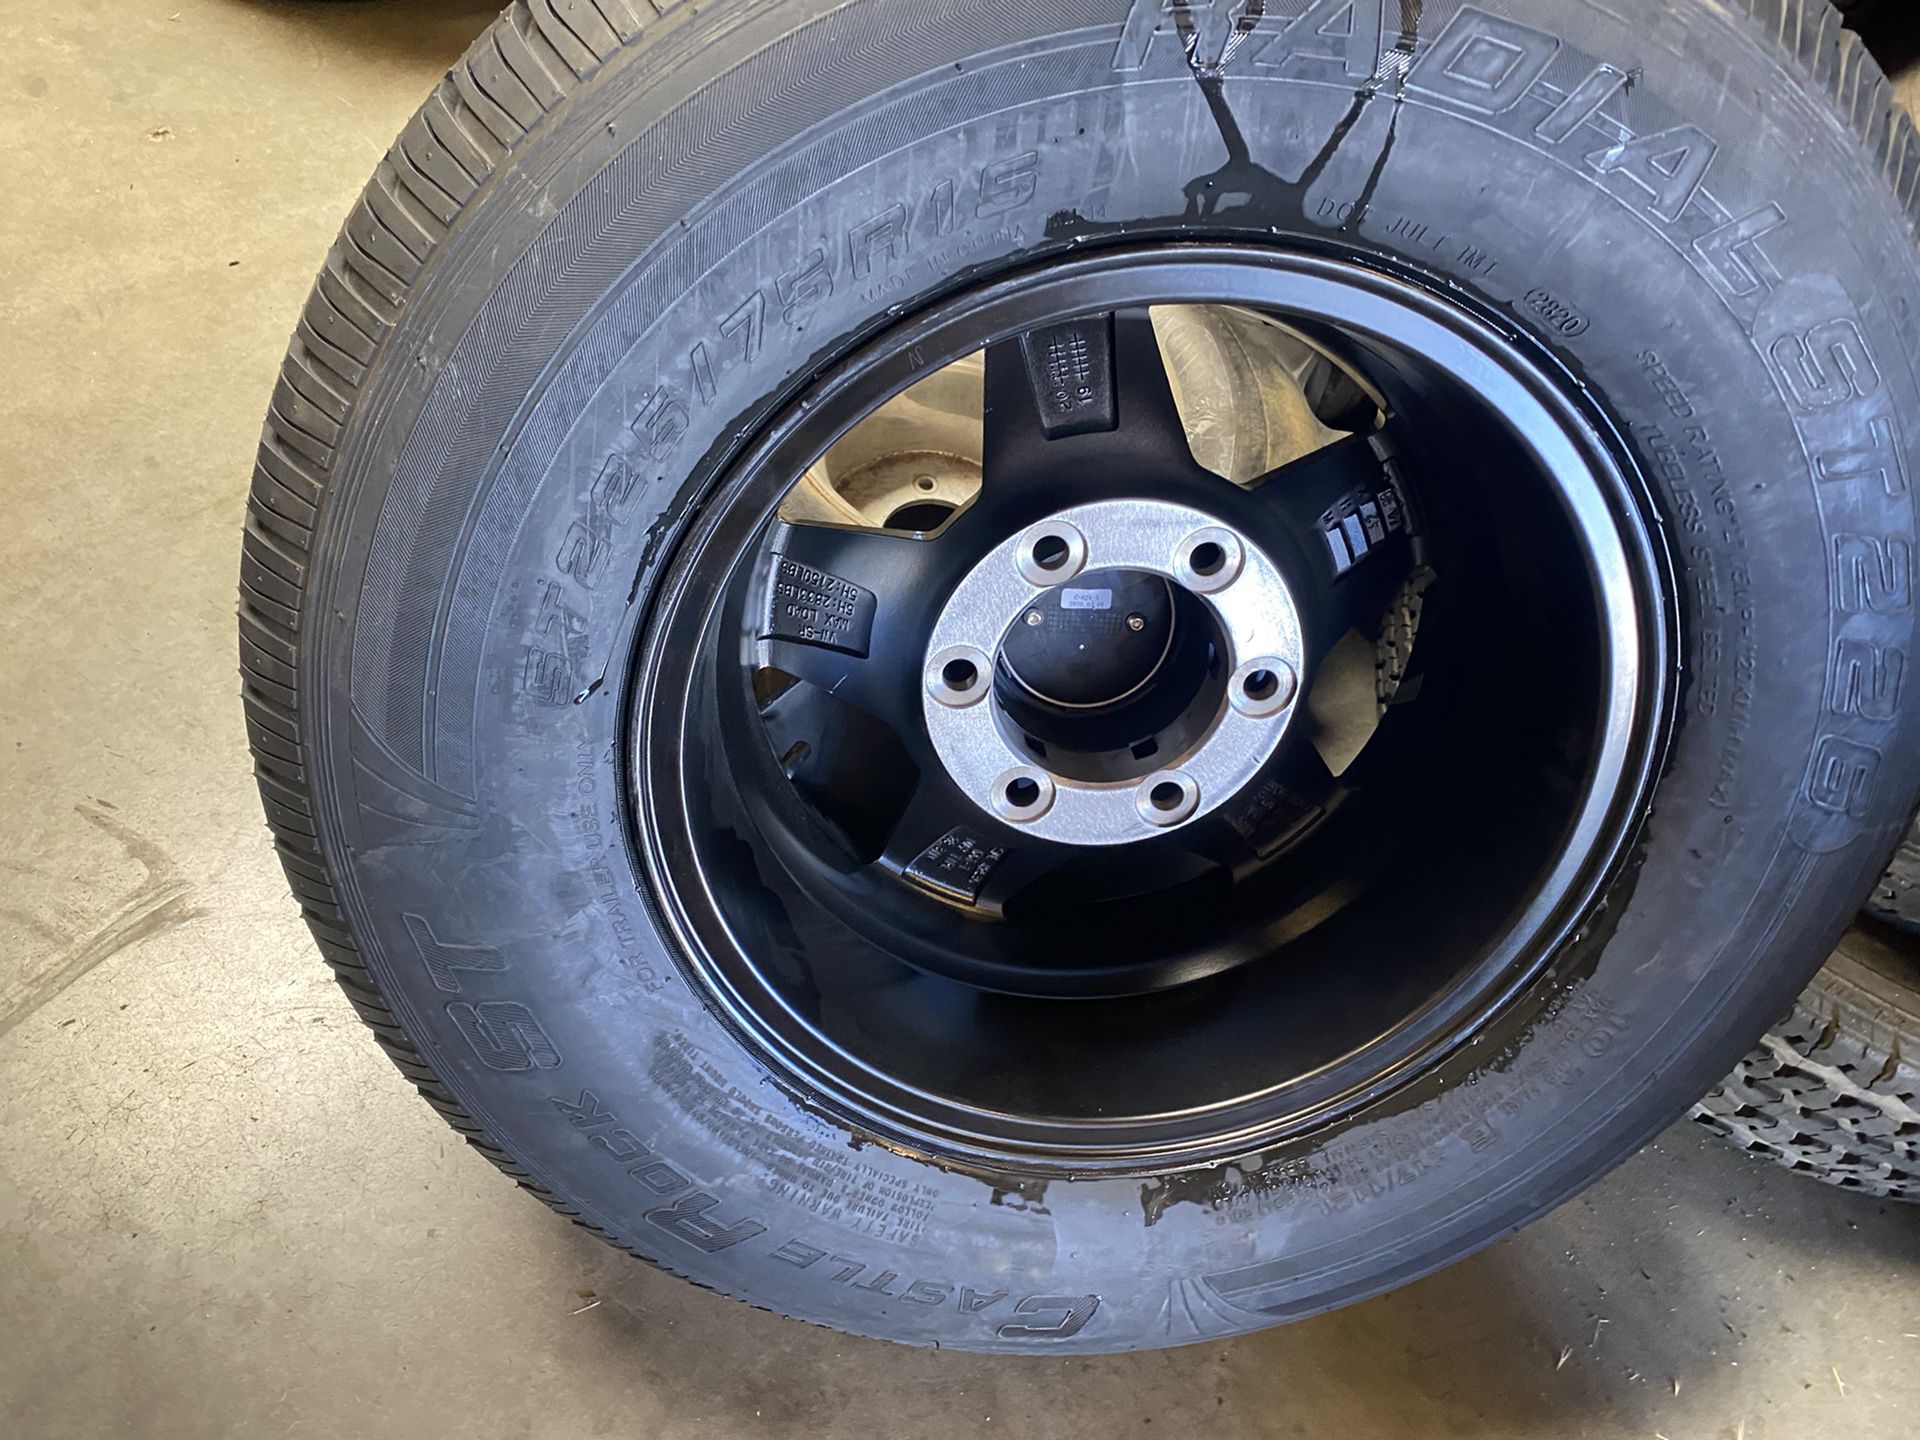 4x ST trailer tire 225x75–15 with 4x 6 lugs 5.5 $720 no bargaining